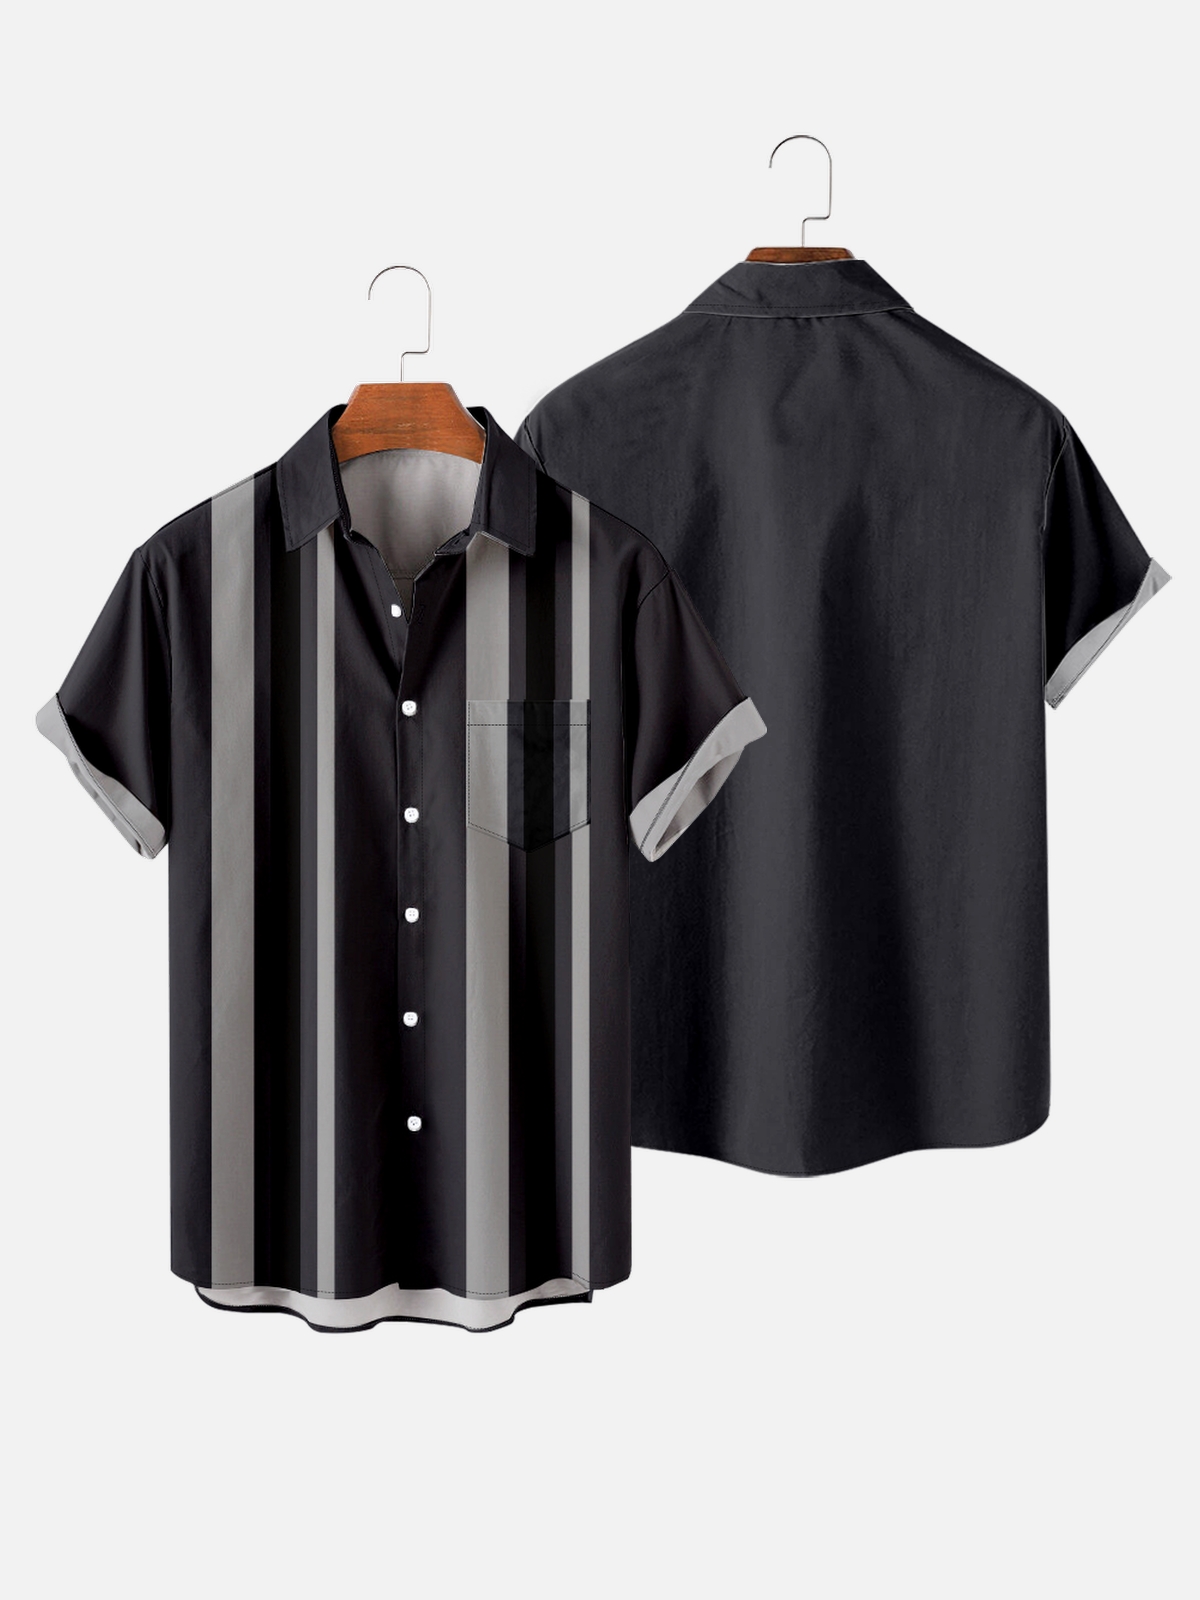 Men's Short Sleeves Shirt with Pocket Casual Style Lapel Neck Summer Tops